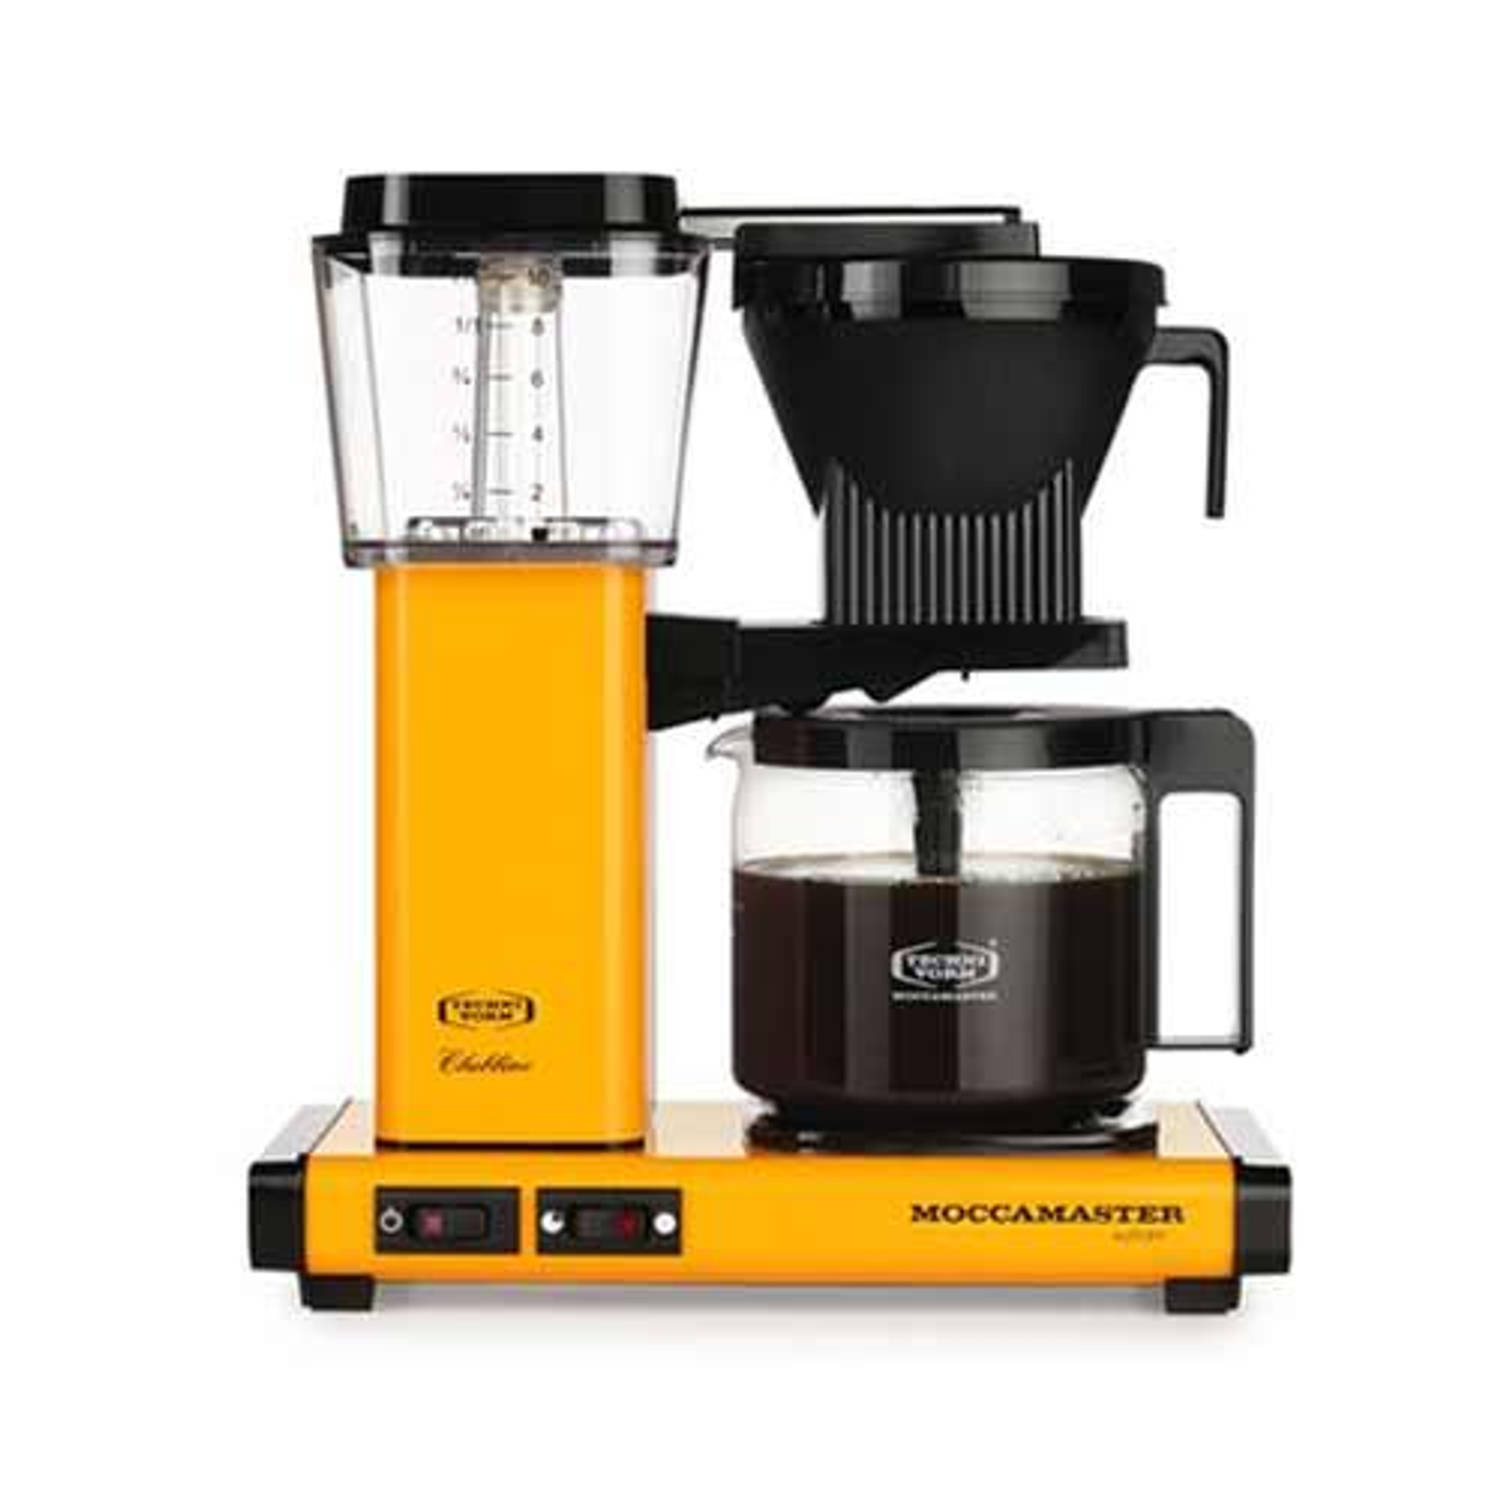 Filterkoffiemachine Kbg741, Yellow Pepper - Moccamaster